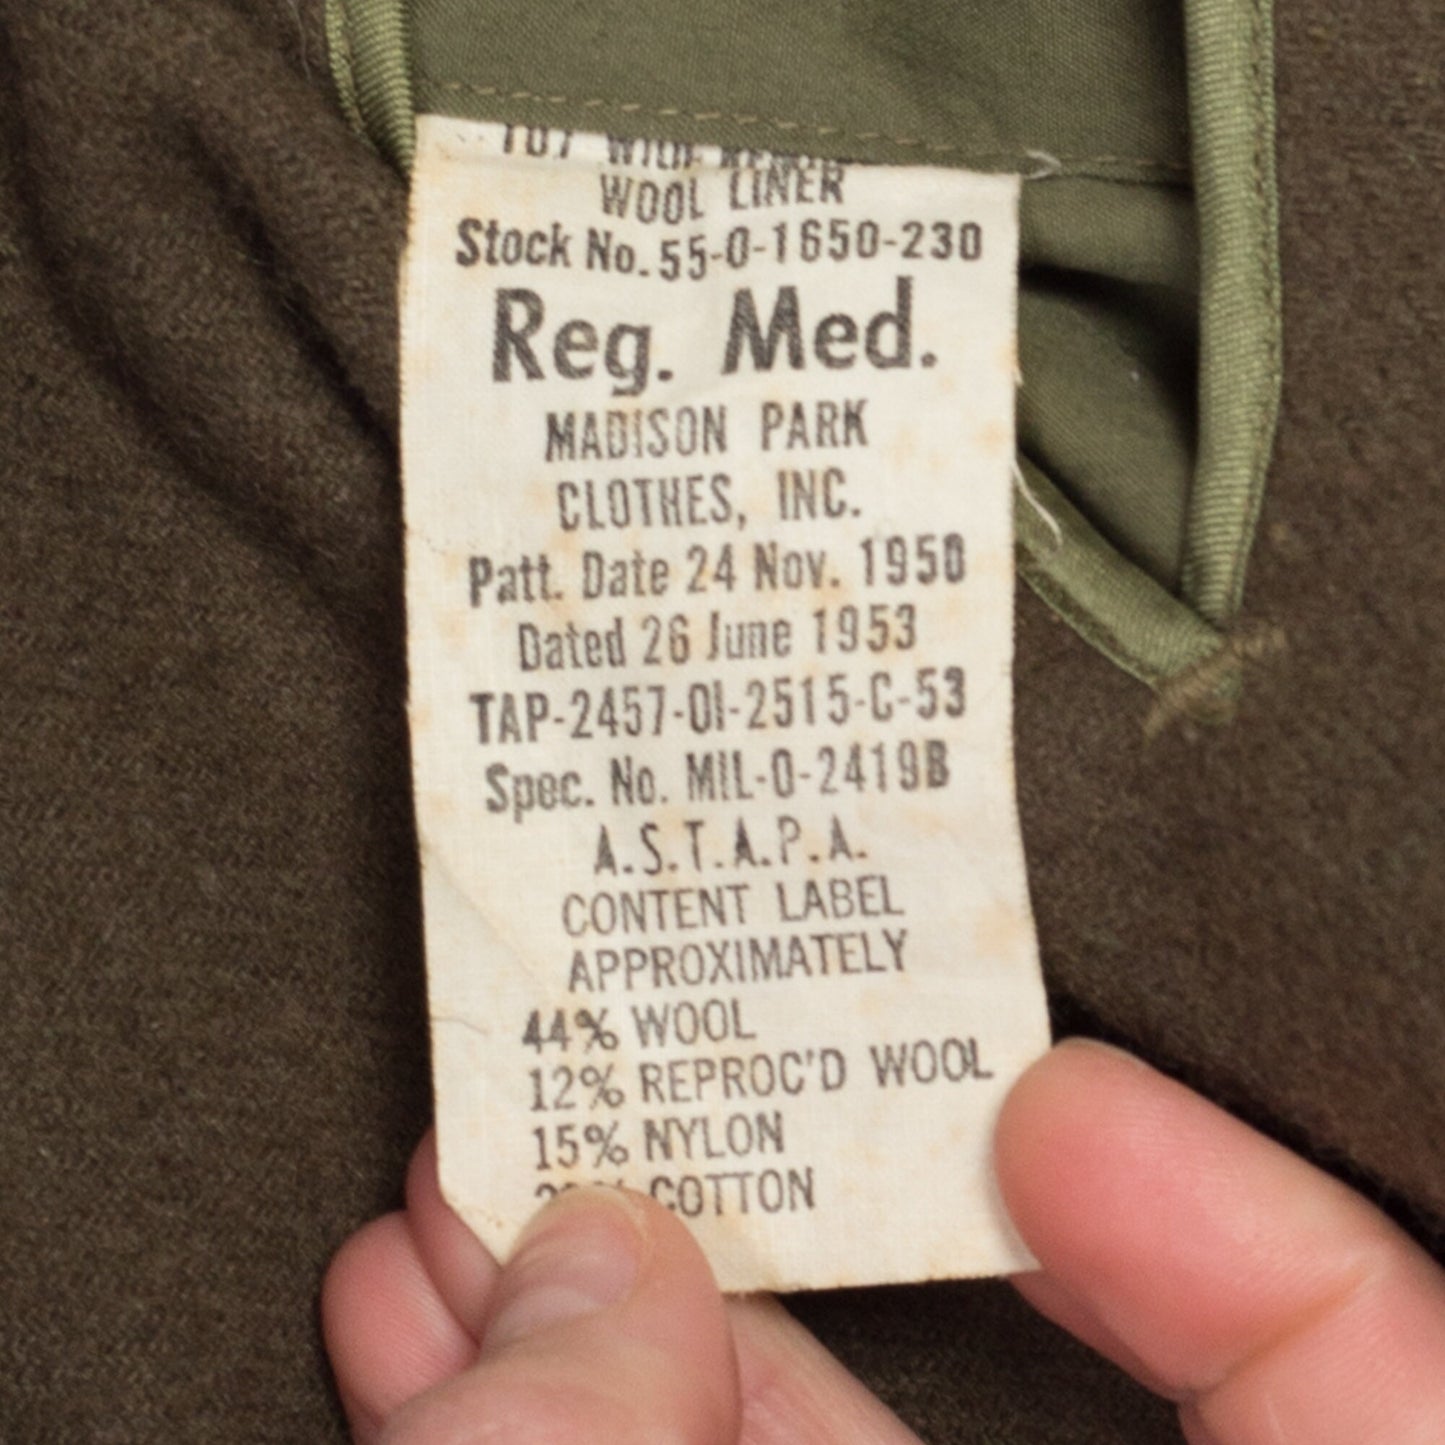 Medium 1950s US Army 107 Belted Trench Coat | Vintage 50s Military Lined Overcoat Olive Drab Long Jacket